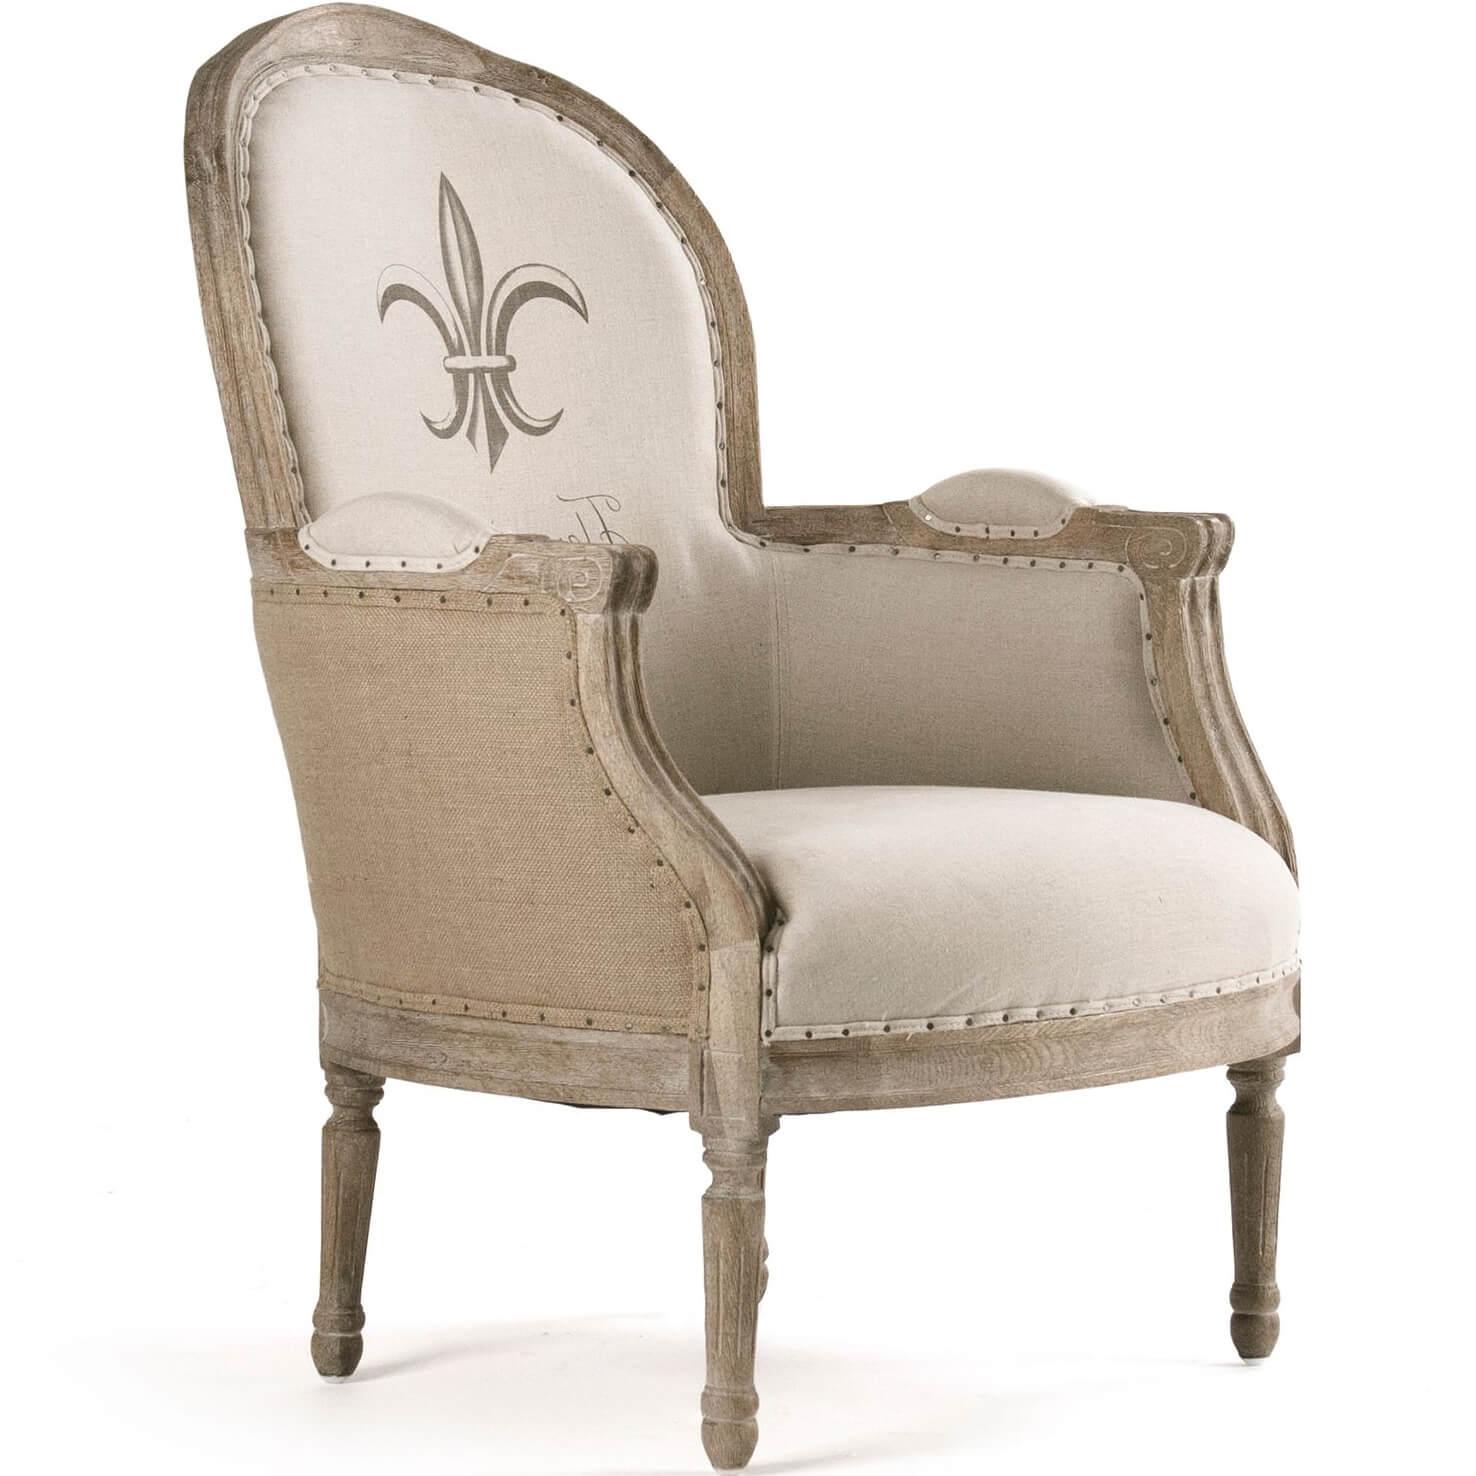 Odessa Jute Rope Wrapped Accent Chair - Coastal Chic Styling